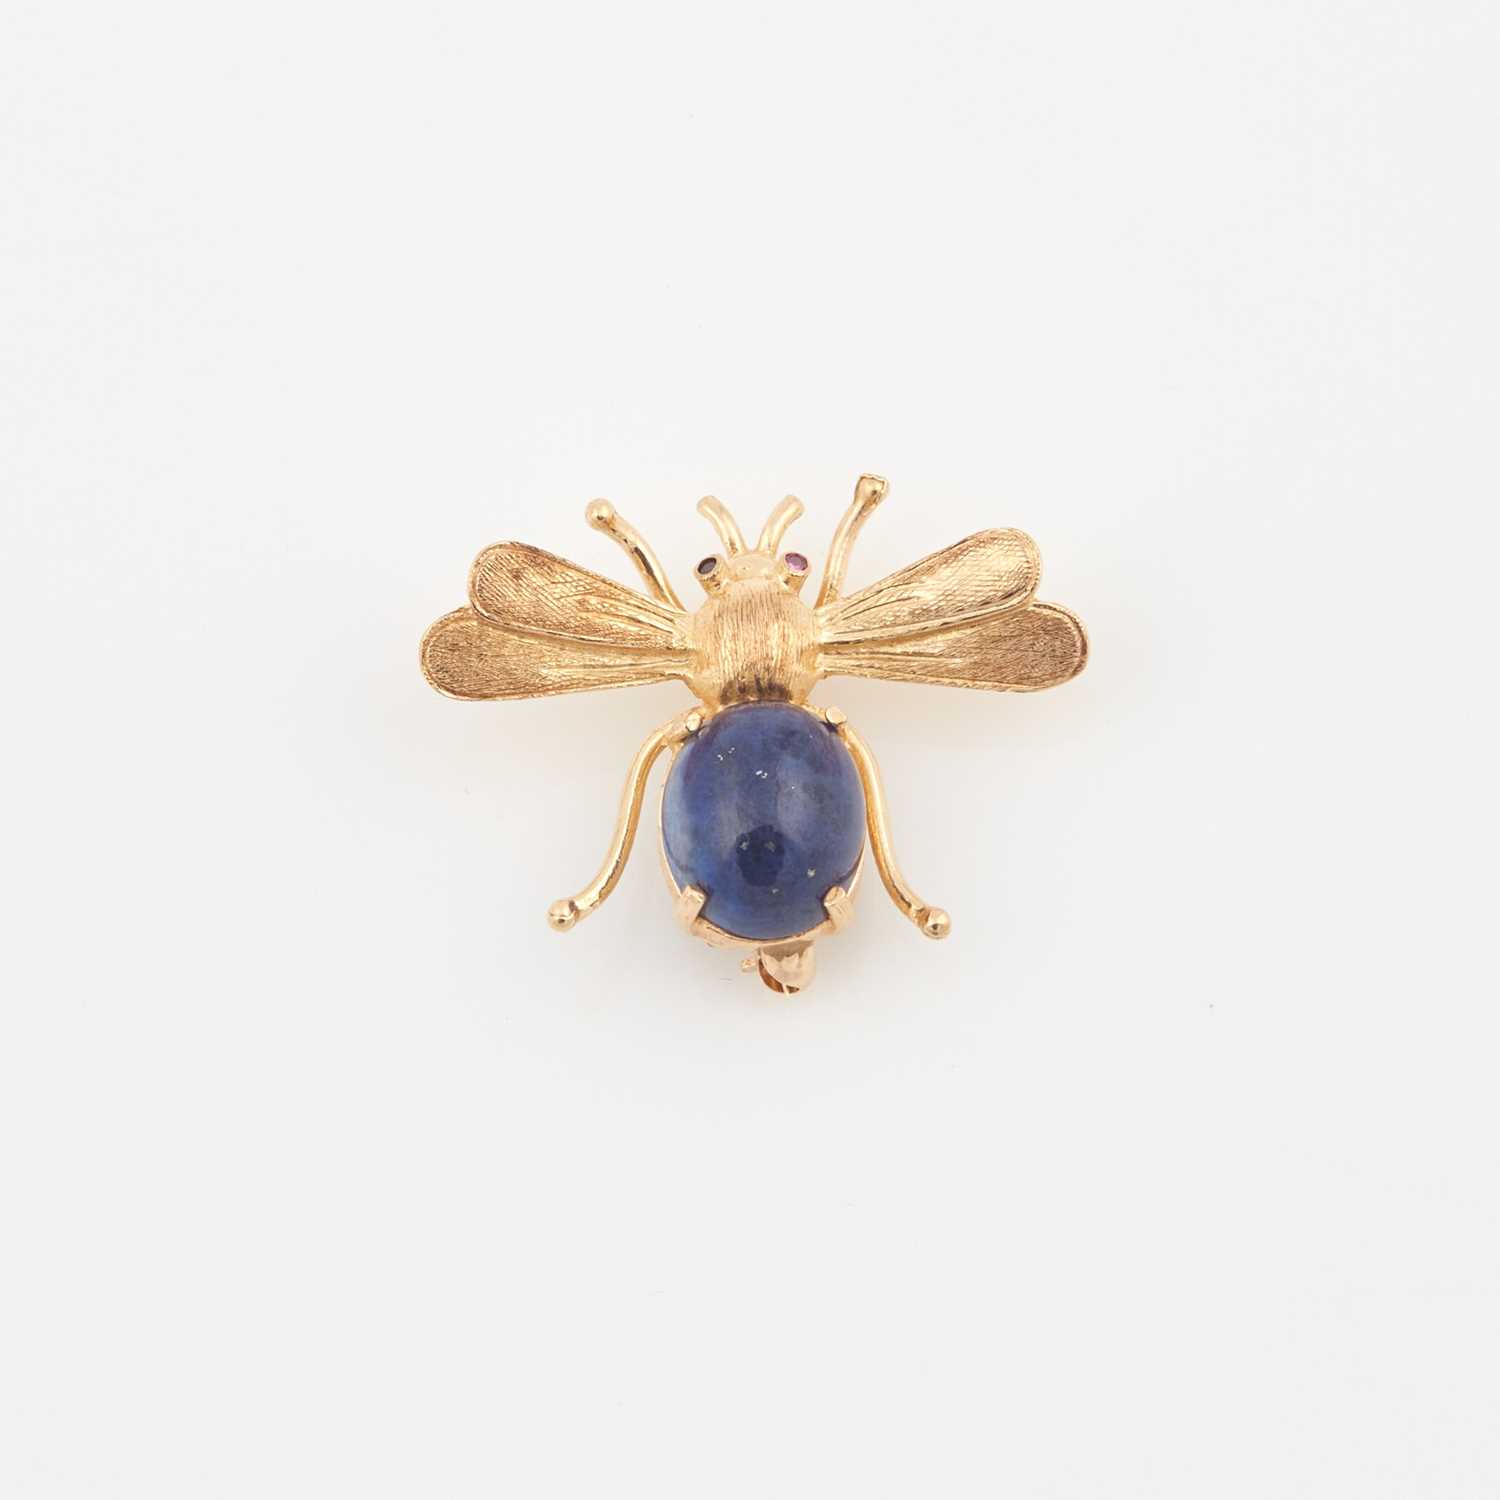 Lot 308 - Gold and Stone Fly Pin, 14K 3 dwt. all